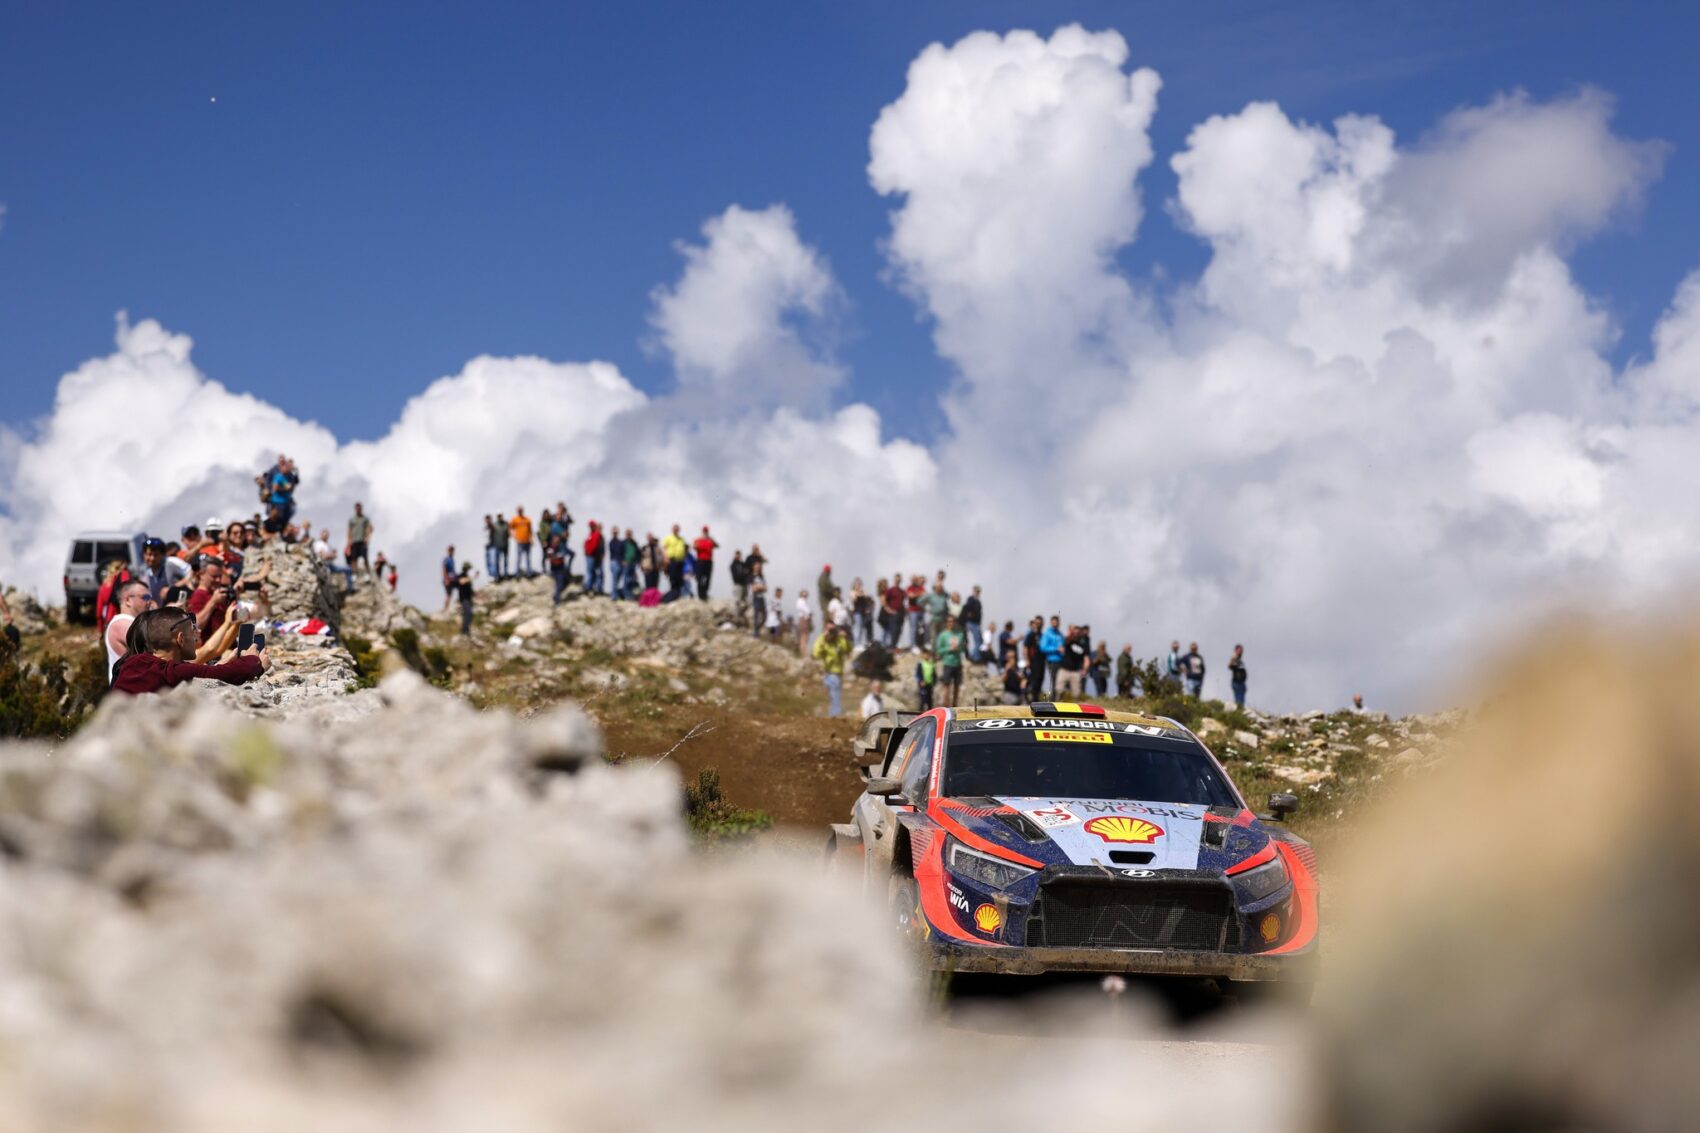 The risk paid off for Team Hyundai